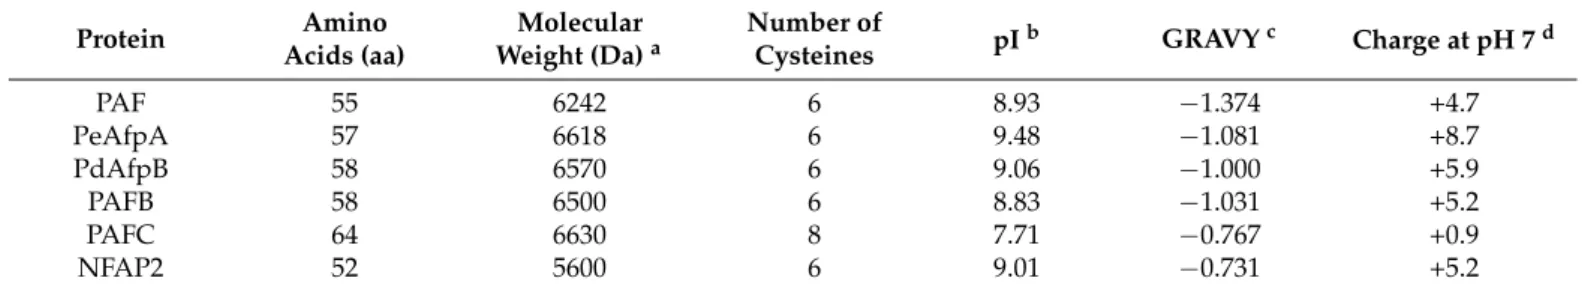 Table 1. Predicted physicochemical properties of mature antifungal proteins used in this work